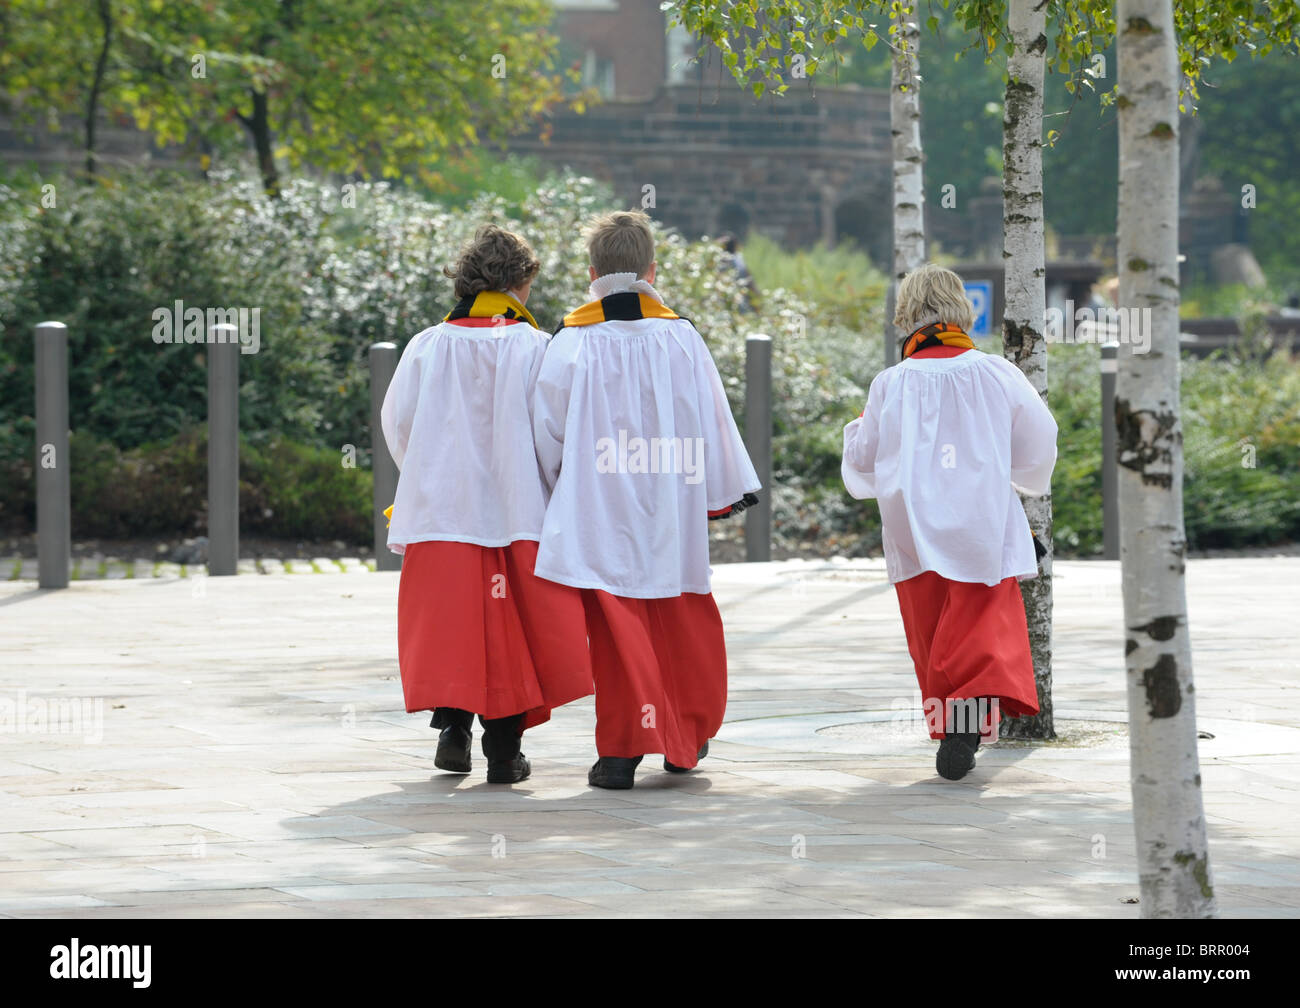 Three choir boys in robes coming back from a Wolves match wearing scarves  walking across a sunlit pavement by St Peter's Stock Photo - Alamy